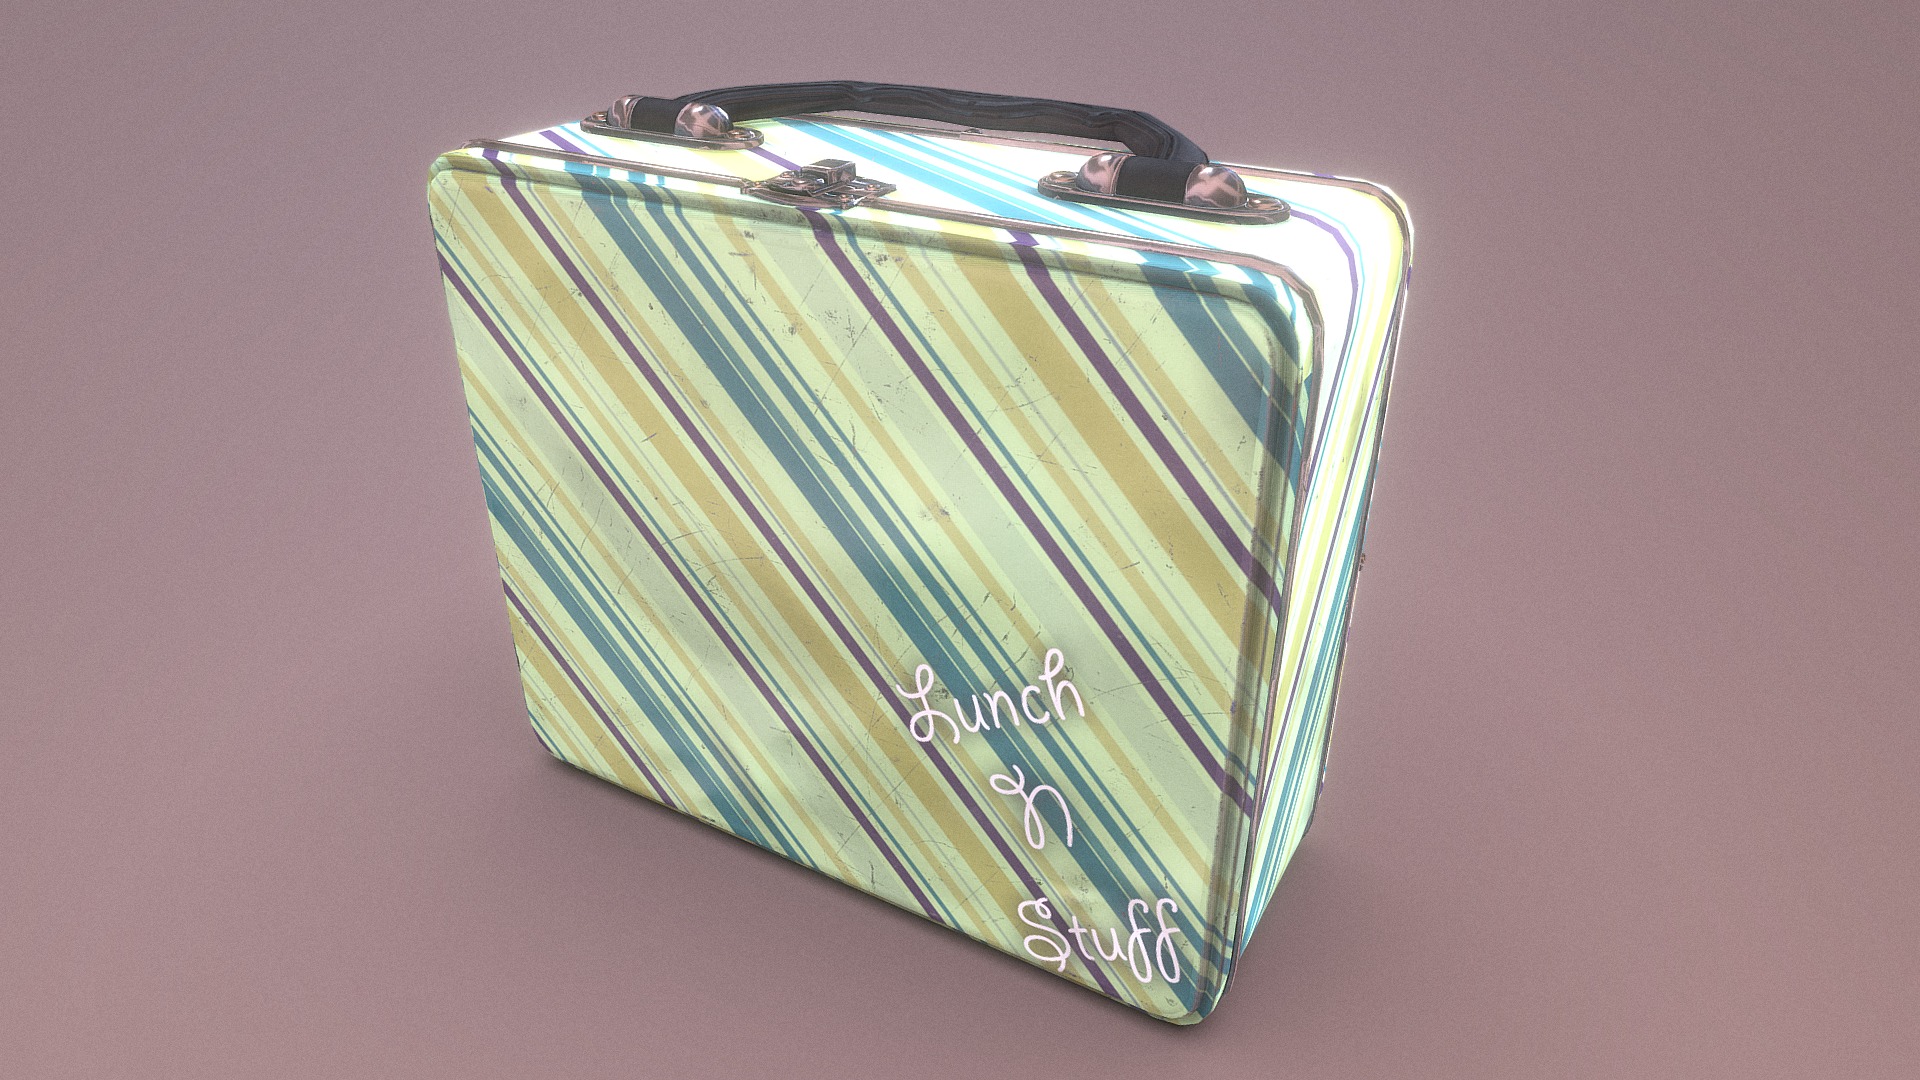 3D model Lunch N Stuff Lunchbox - This is a 3D model of the Lunch N Stuff Lunchbox. The 3D model is about a blue and yellow pouch.